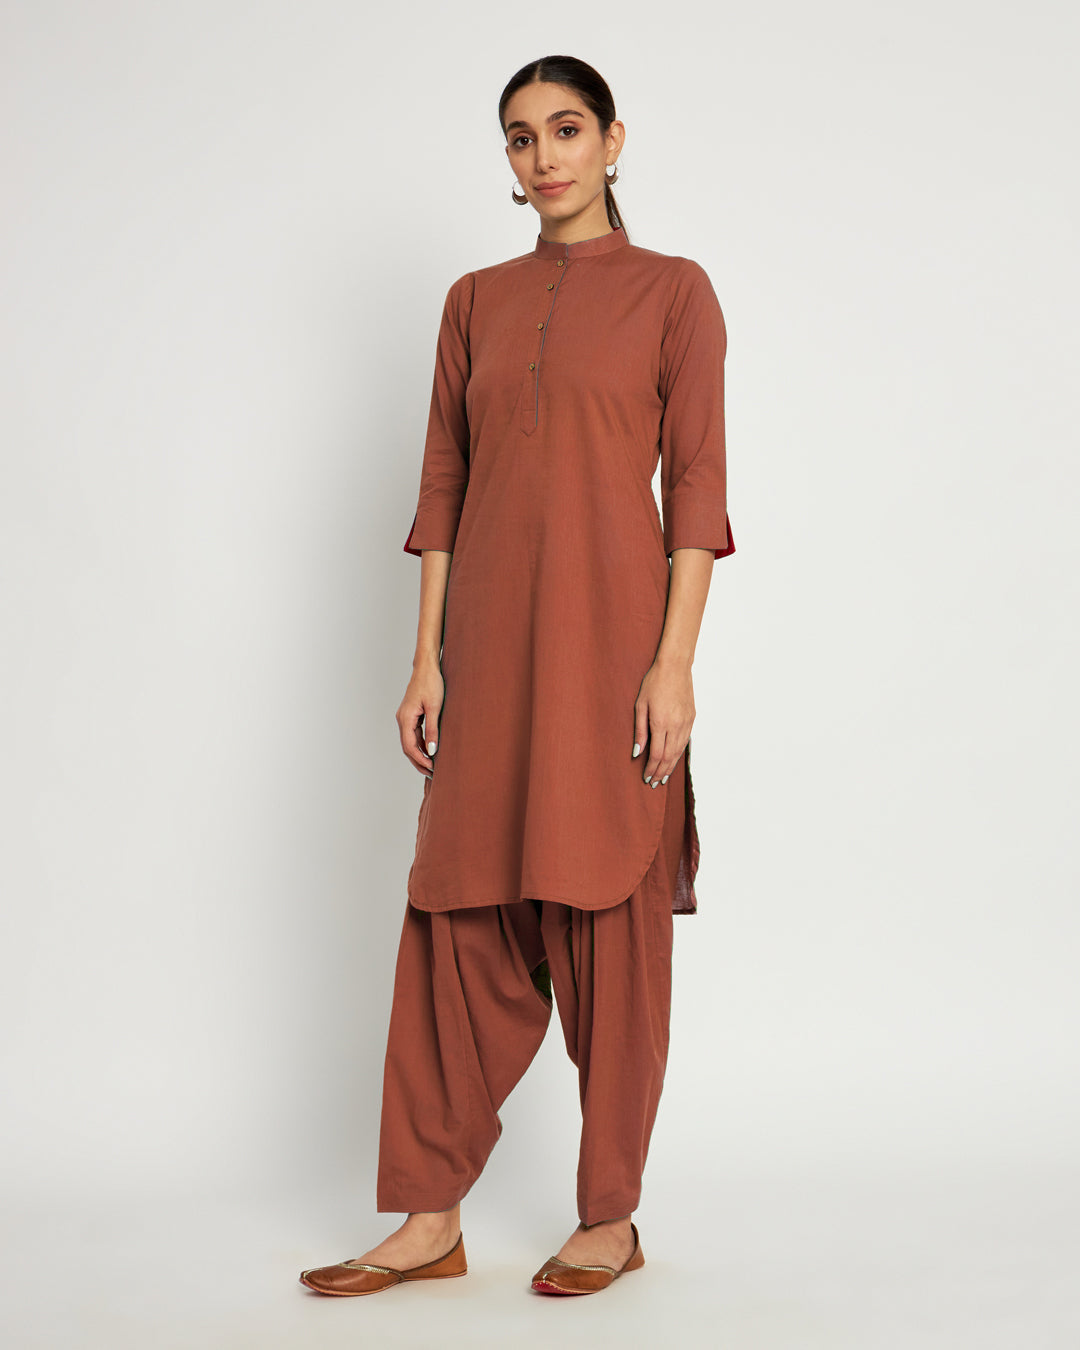 Blush In Love Band Collar Neck Solid Kurta (Without Bottoms)